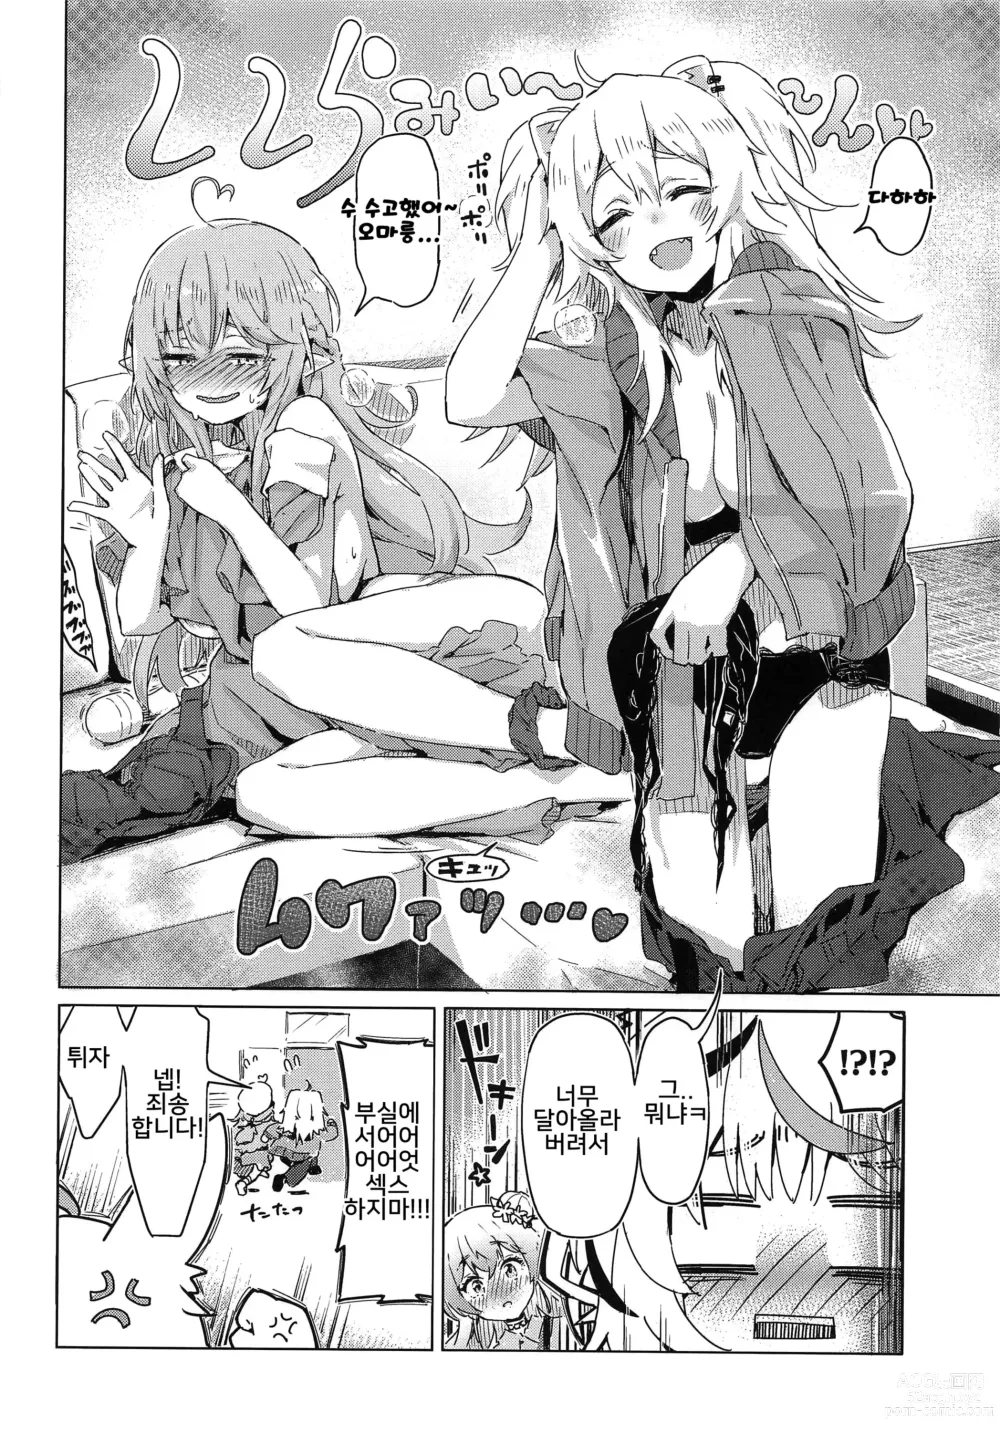 Page 9 of doujinshi Fennec wa Iseijin no Yume o Miru ka - Does The Fennec Dream of The Lovely Visitor?